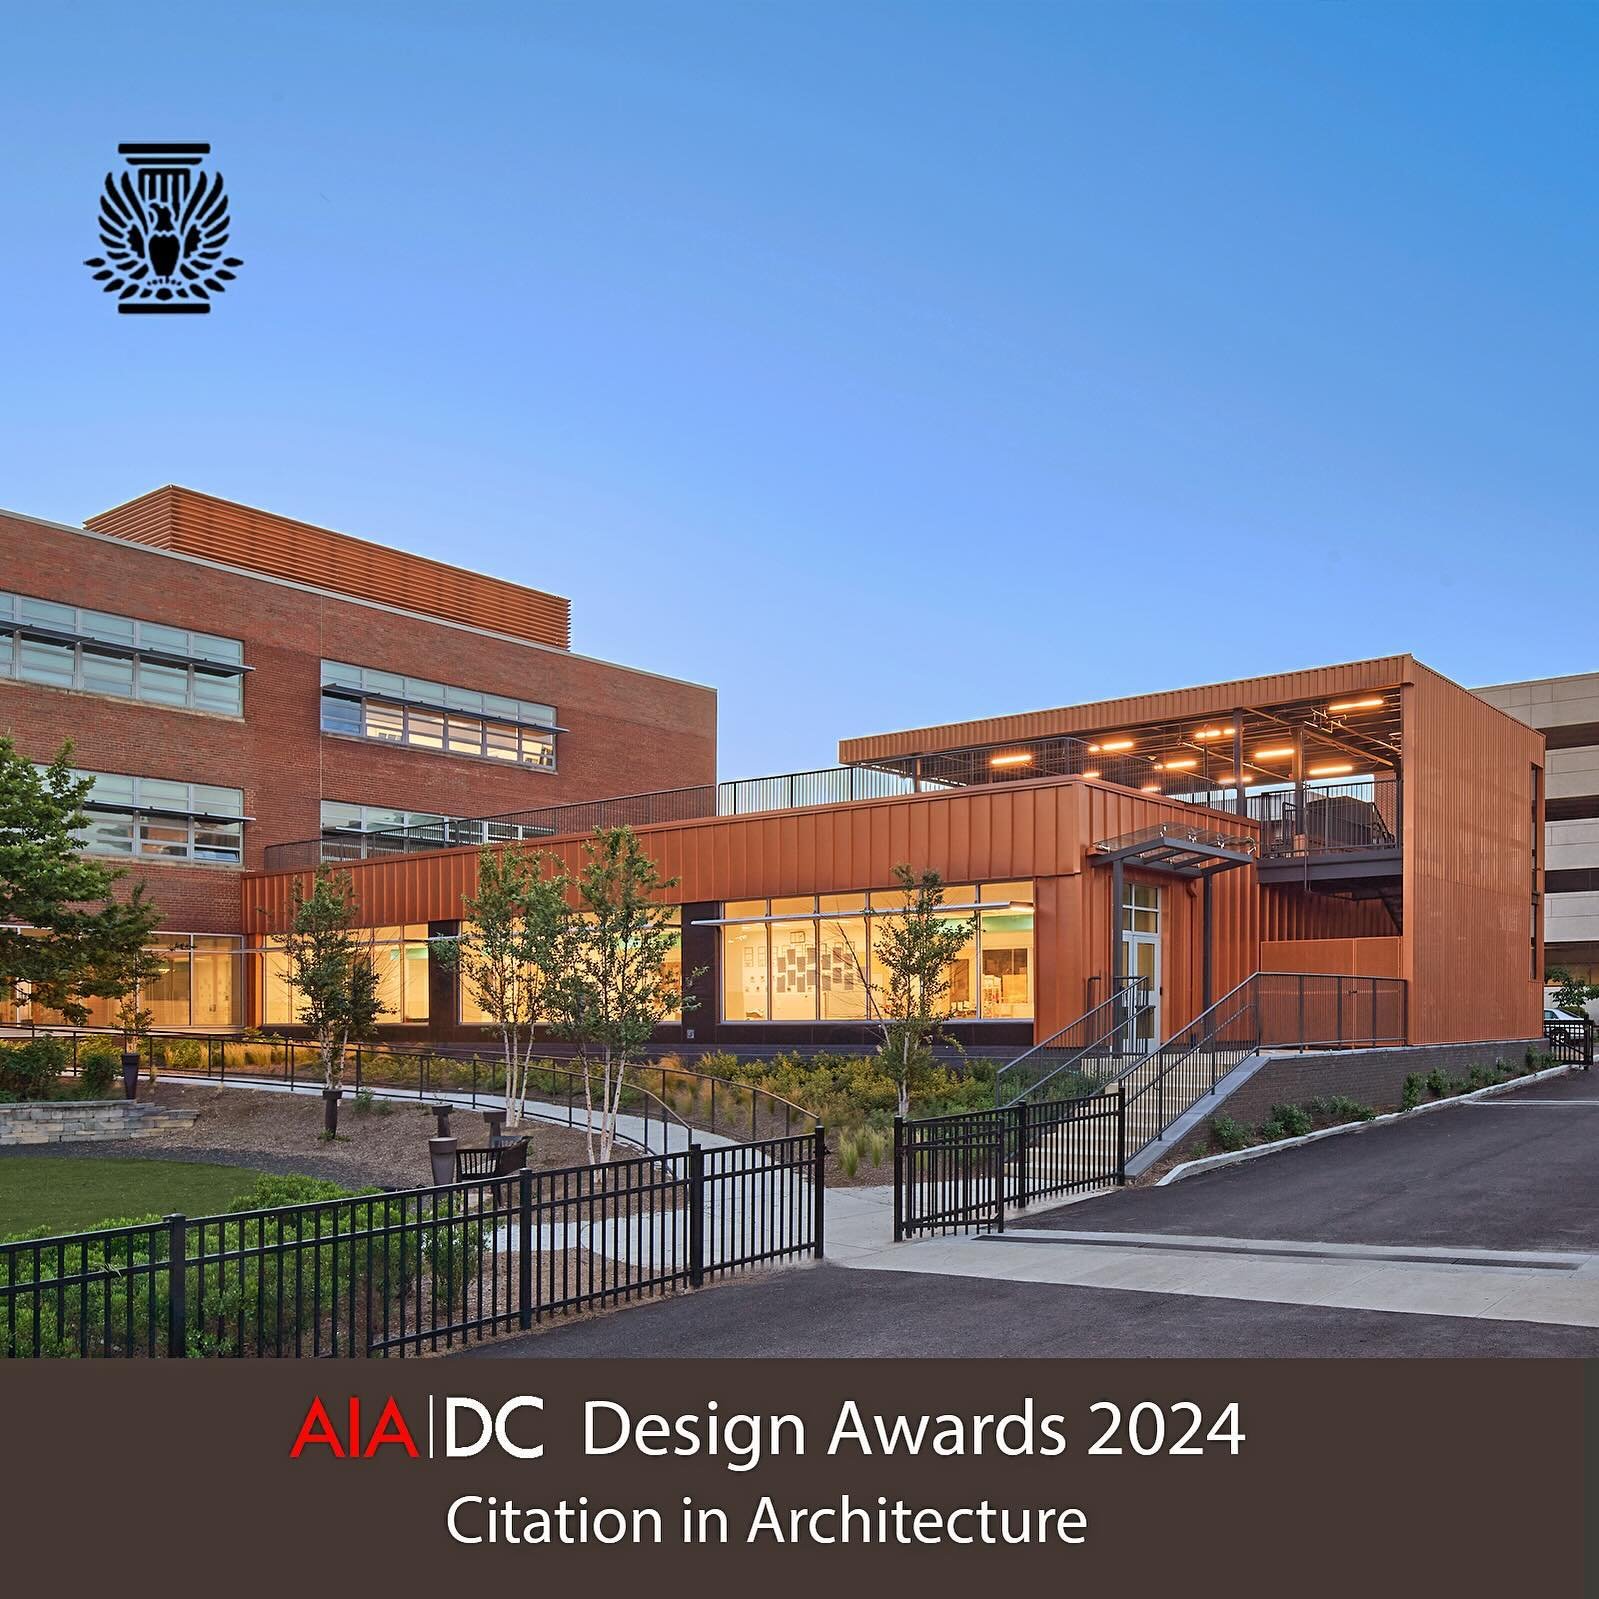 We&rsquo;re honored that Van Ness Elementary School with its rooftop garden and classroom has been received a citation in this year&rsquo;s AIA|DC design awards!

#design #architecture #award #greenschool #k12 #educational #roof #garden #outdoor #cla